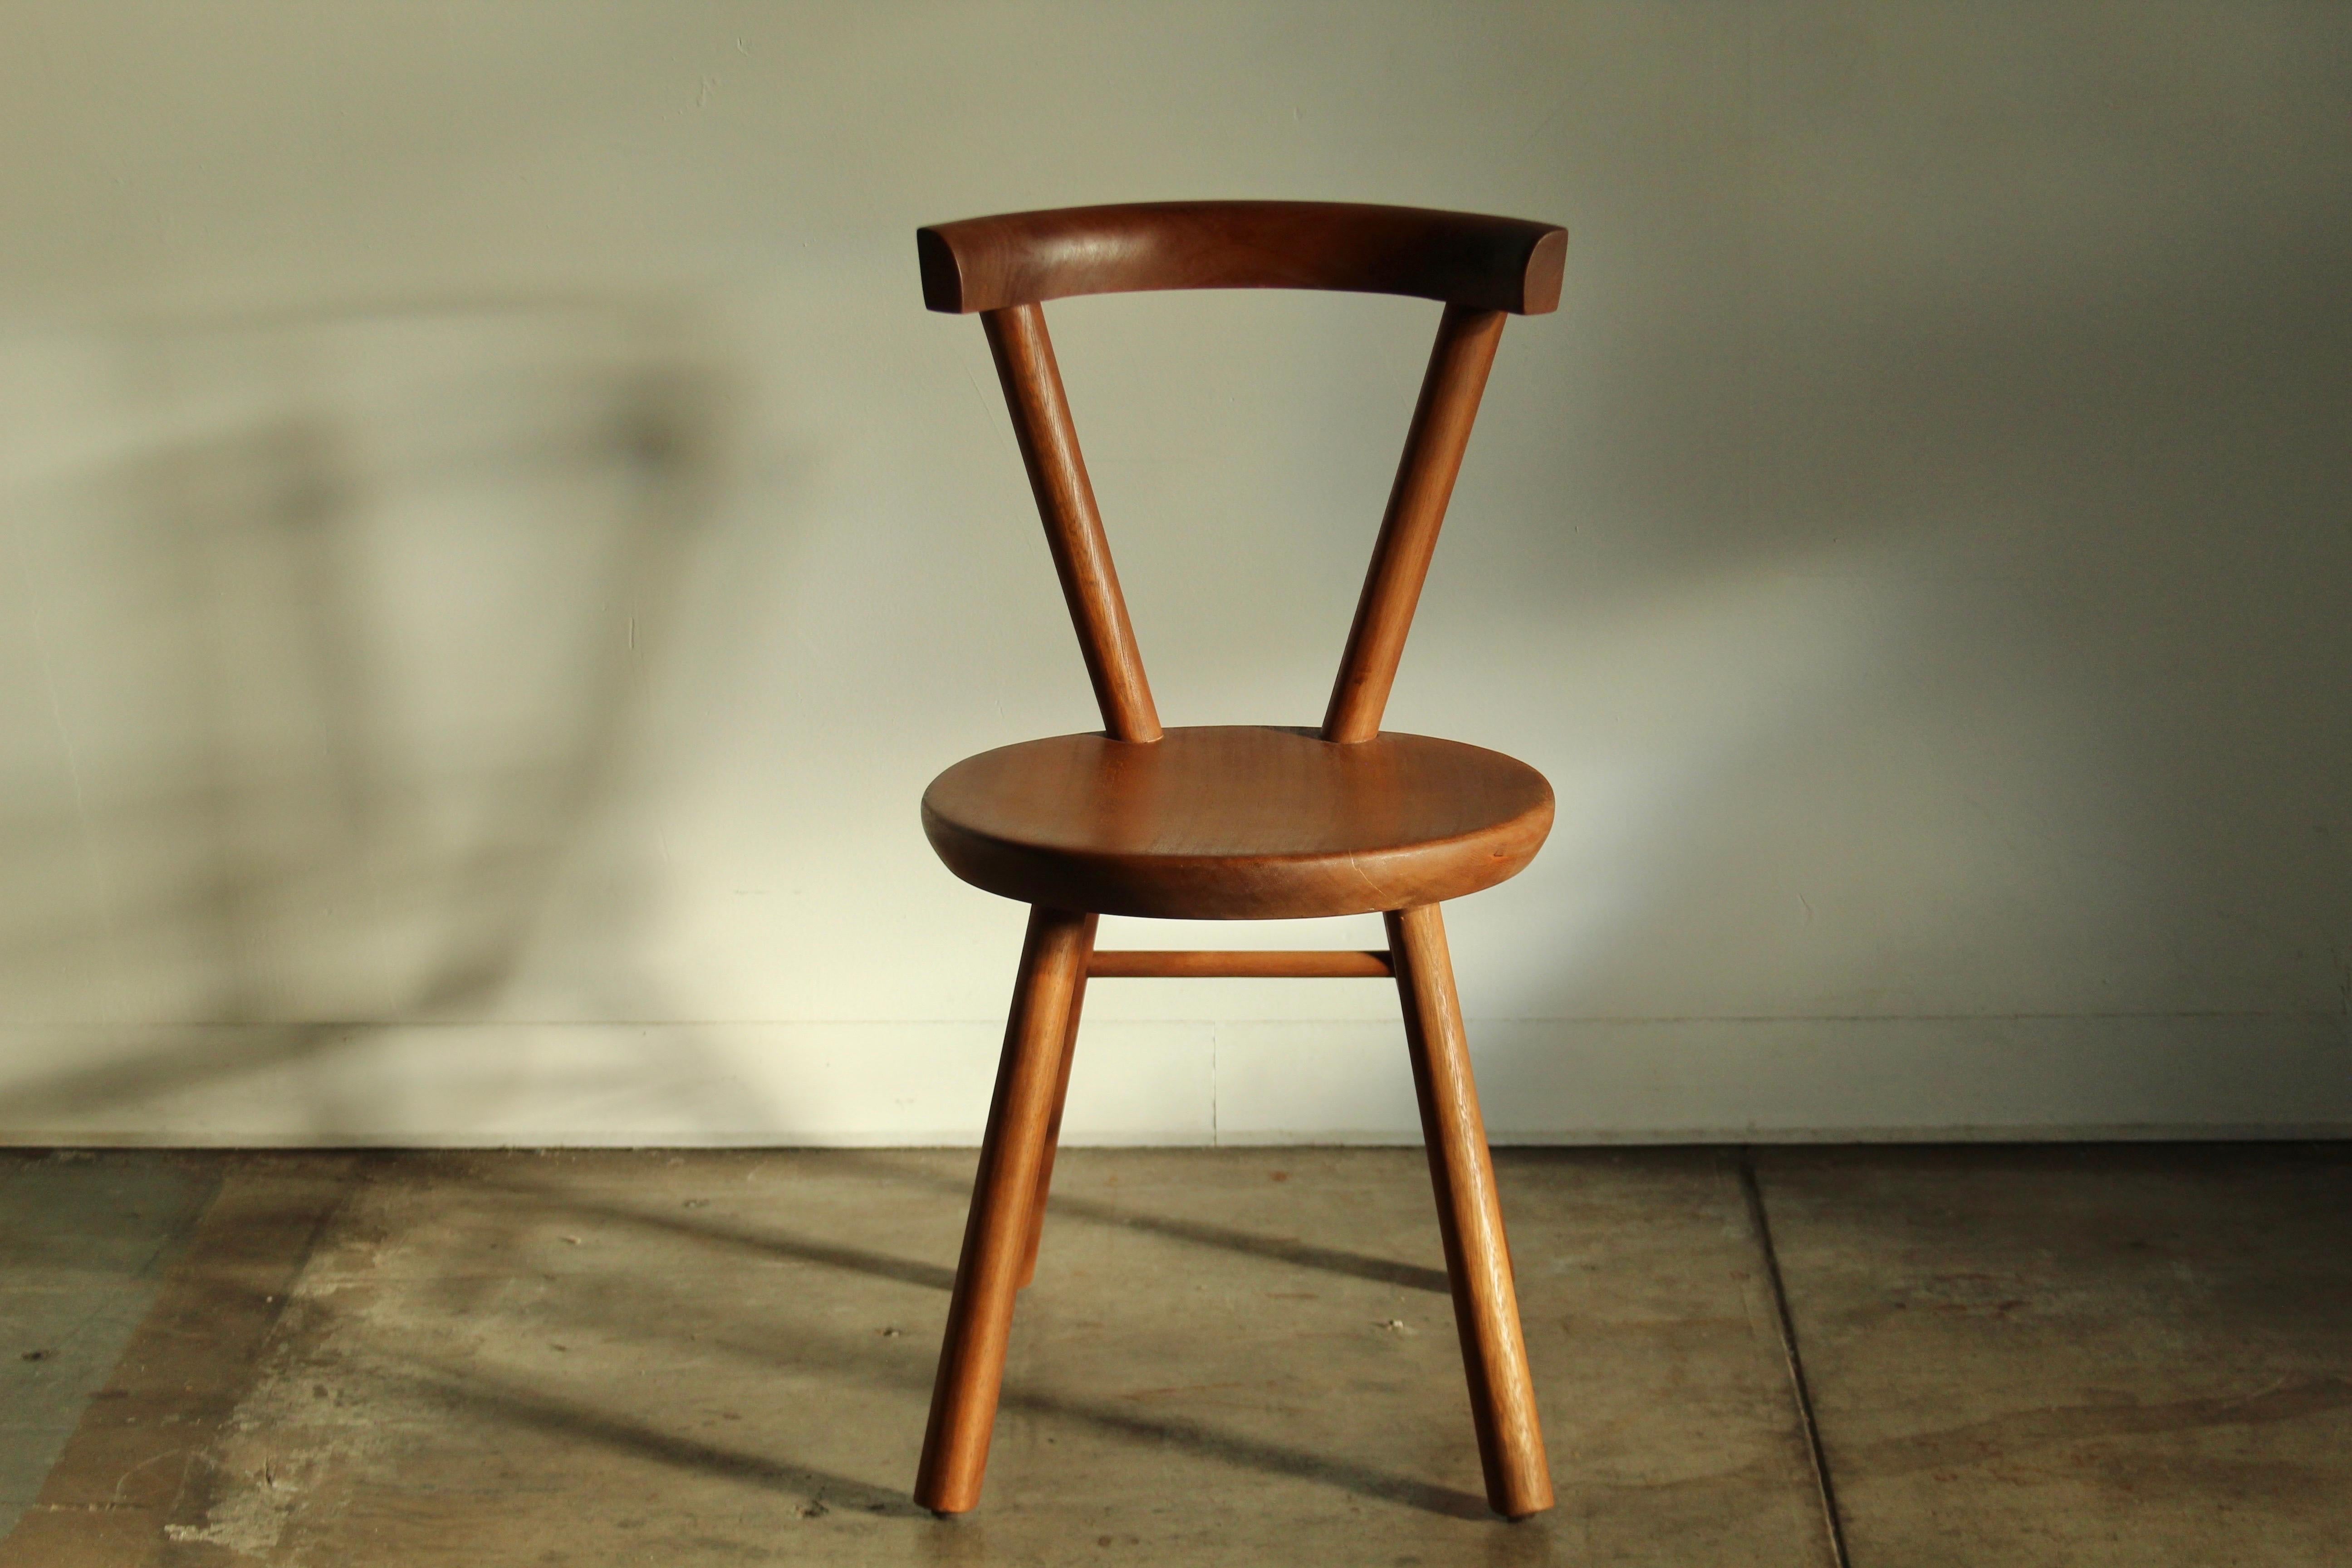 Beautiful modernist dining or accent chair constructed in solid mahogany circa 1980s, in the style of the Charlotte Perriand or Jean Touret. Superb craftsmanship, without any screws or hardware. Tons of character. Perfect at a dining table, a desk,